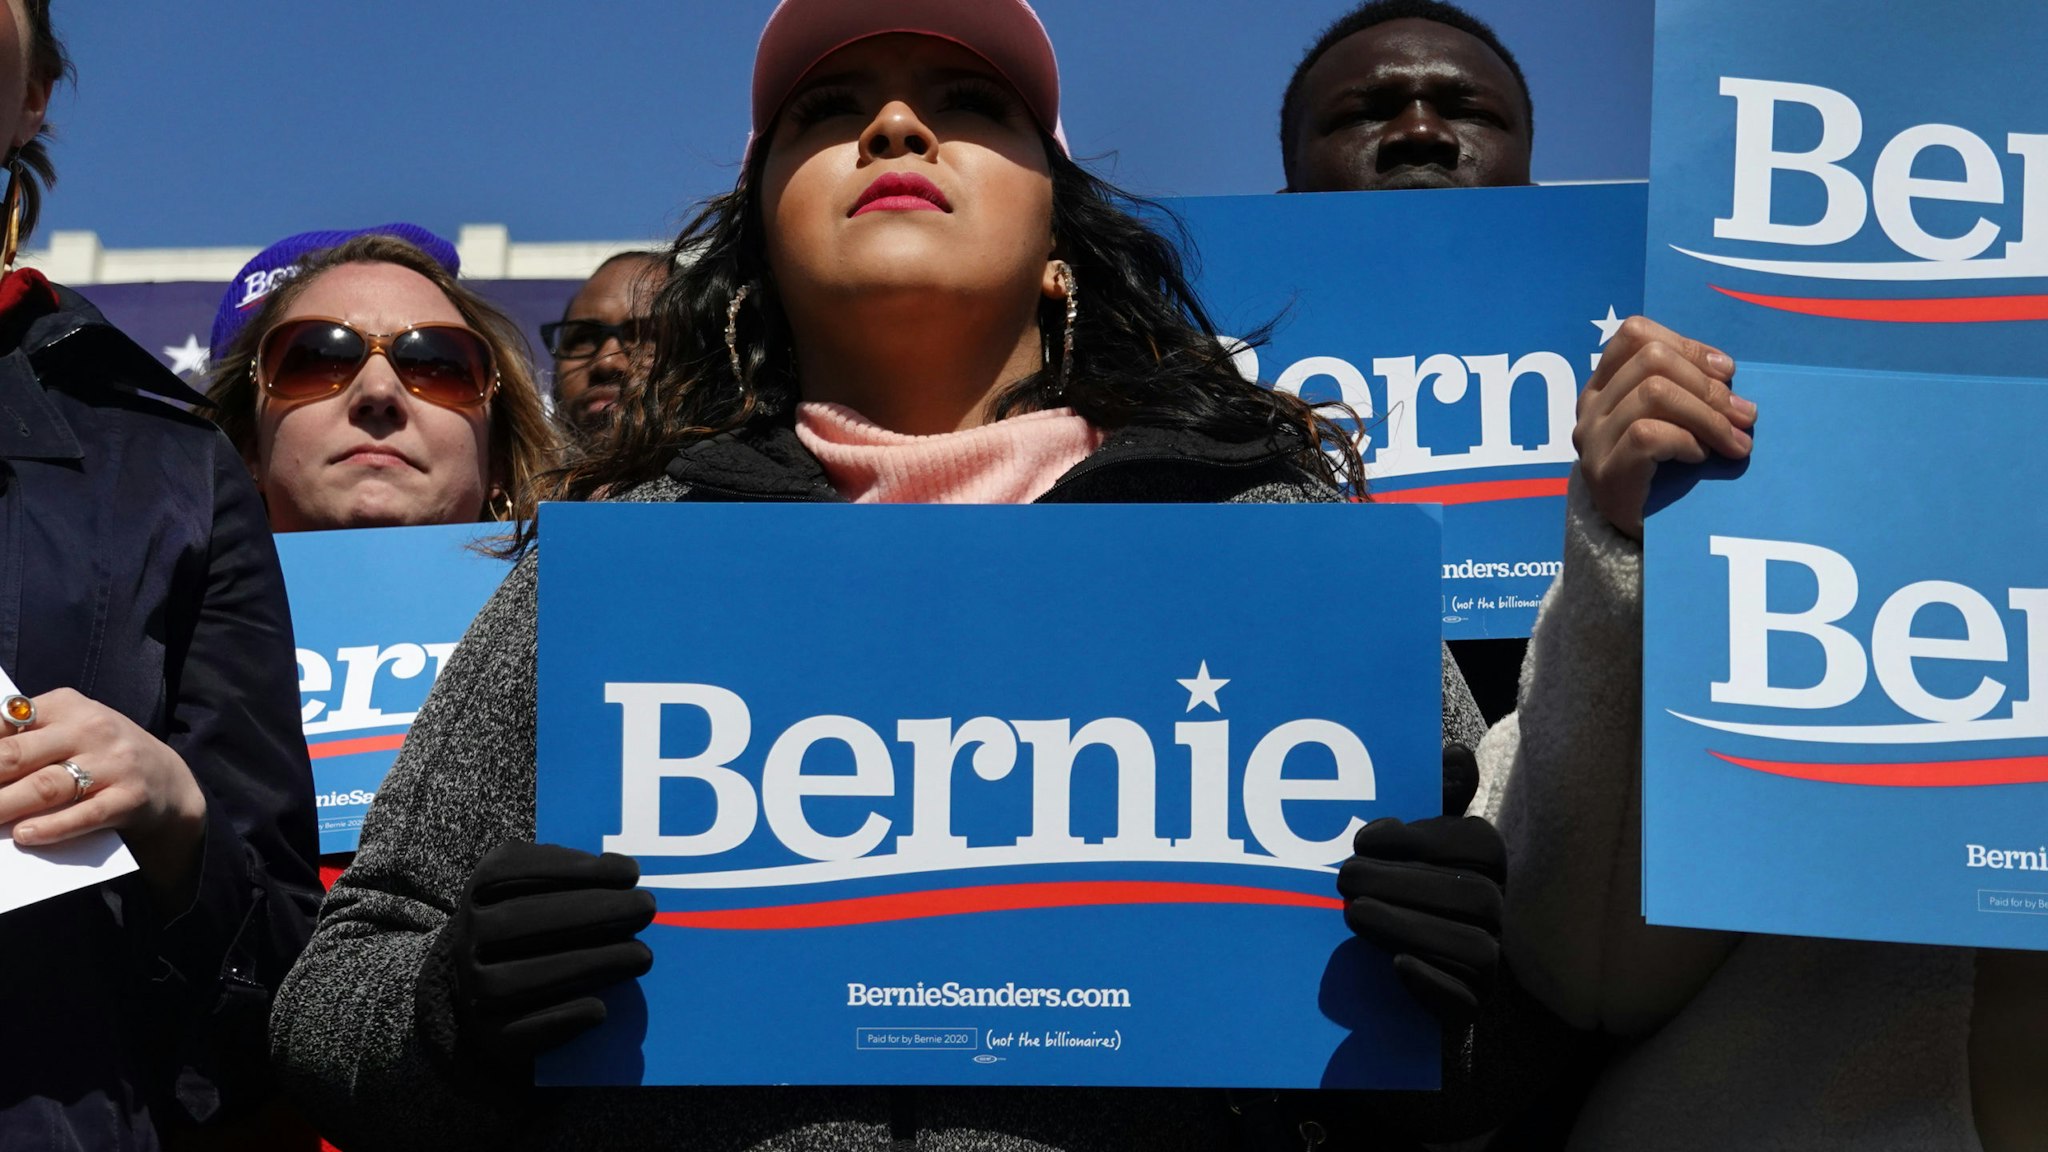 GRAND RAPIDS, MICHIGAN - MARCH 08: Supporters of Democratic presidential candidate Sen. Bernie Sanders (I-VT) attend a campaign rally in Calder Plaza on March 08, 2020 in Grand Rapids, Michigan. Michigan holds its primary election on Tuesday March 10. (Photo by Scott Olson/Getty Images)